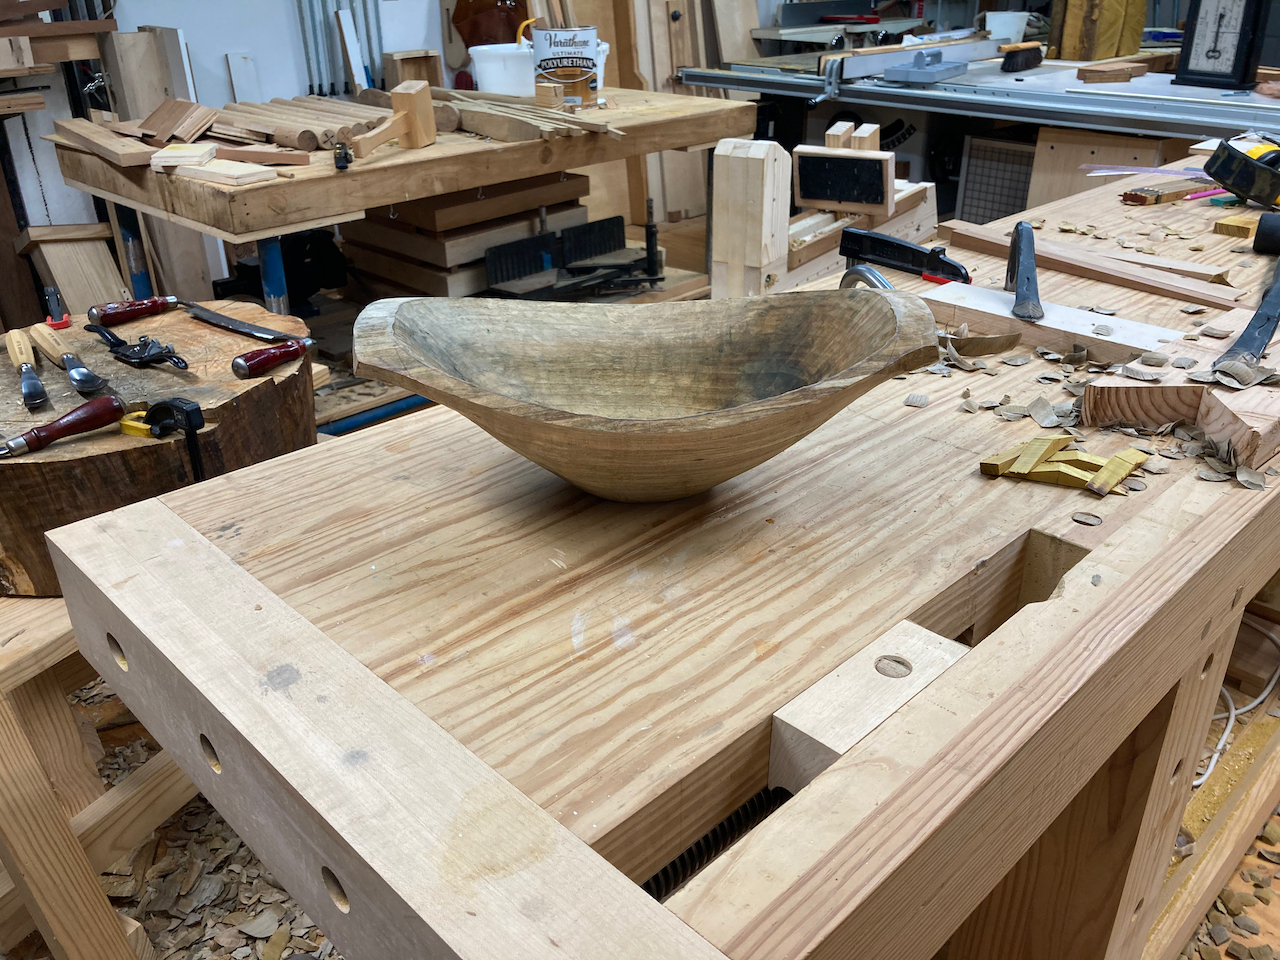 Mostly roughed out bowl